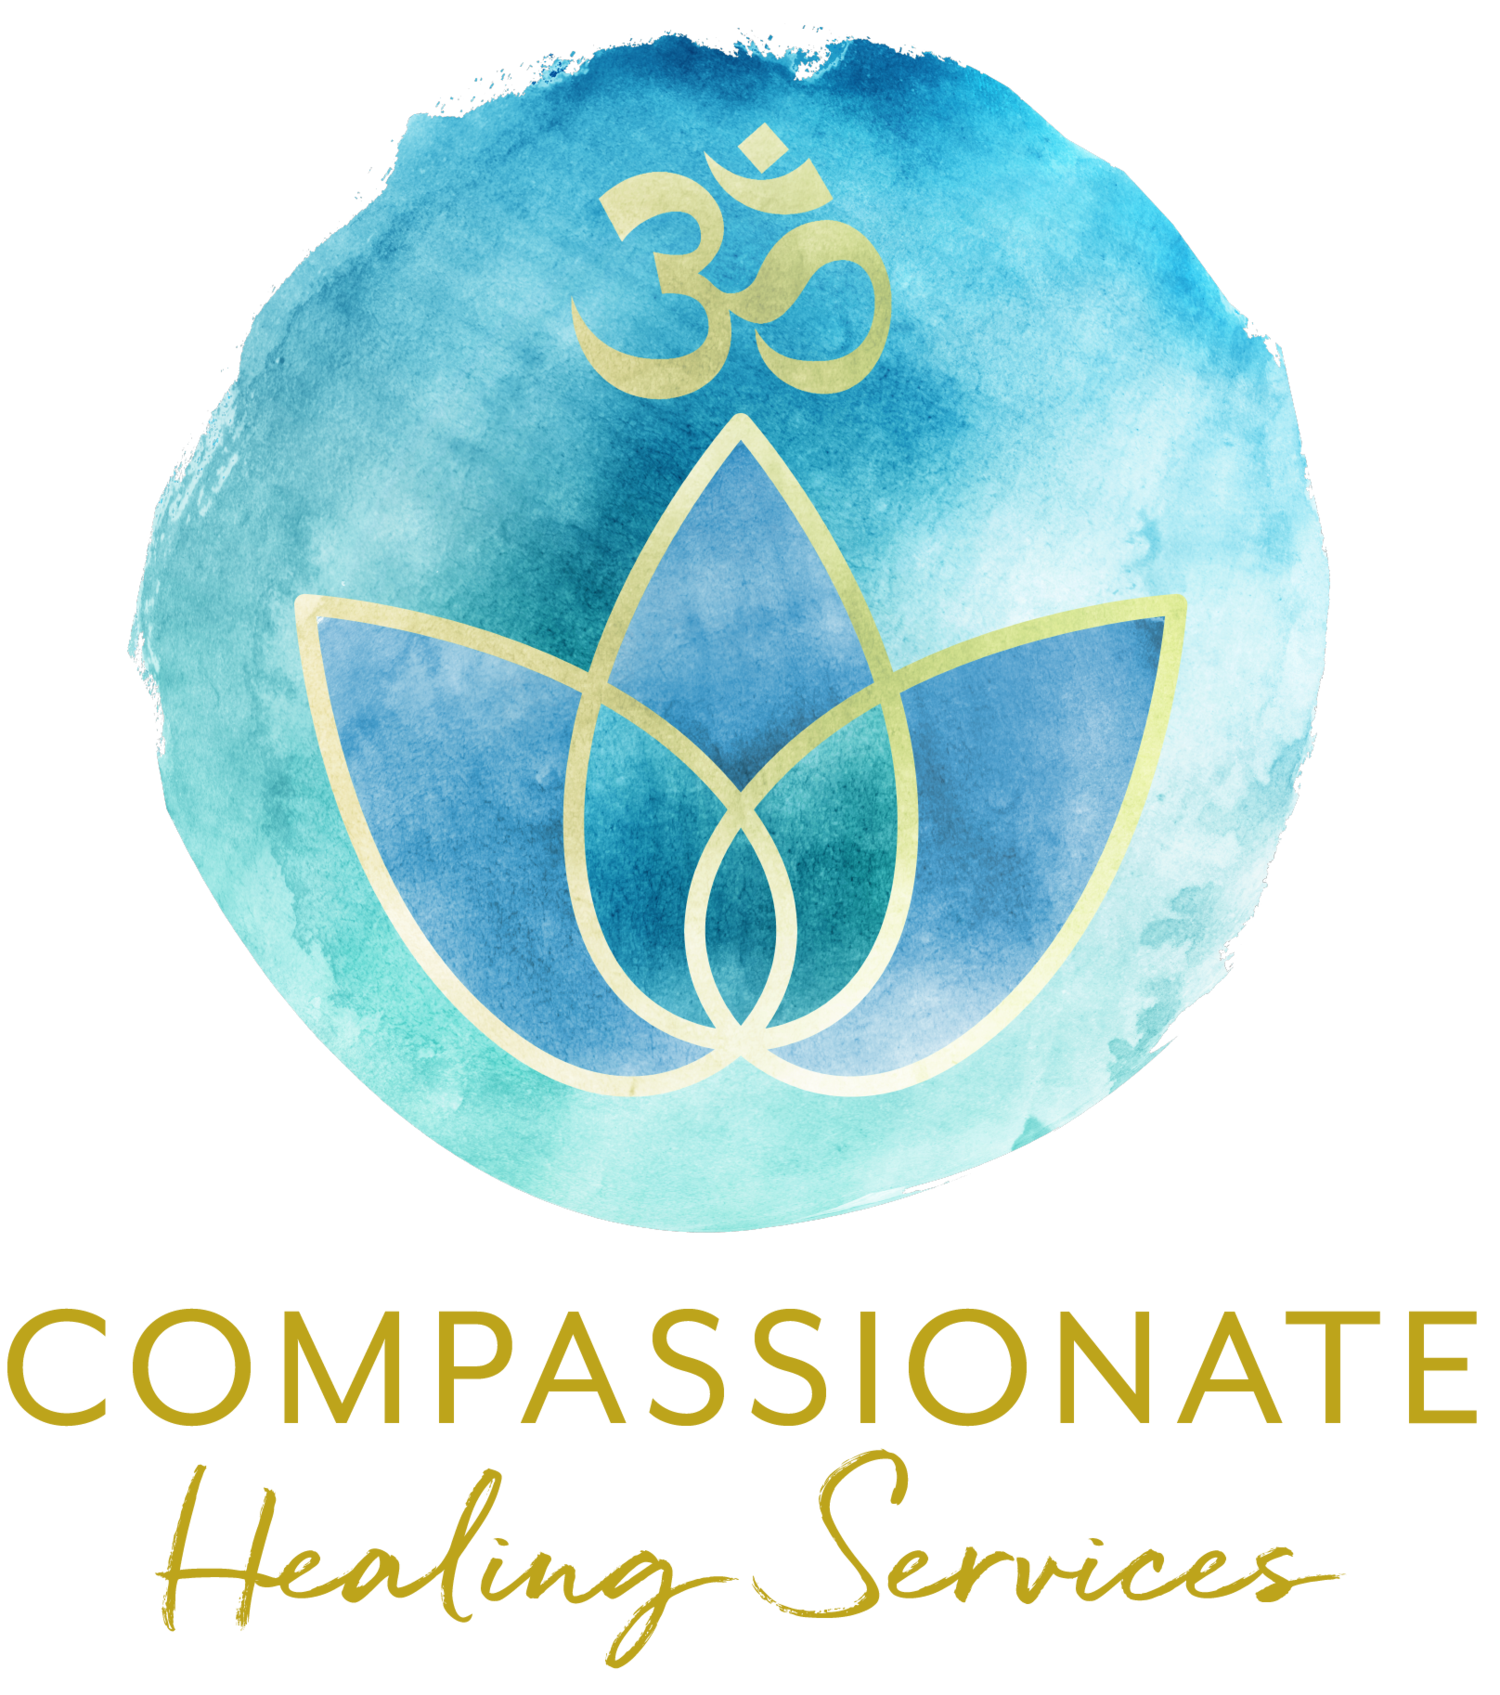 Compassionate Healing Services